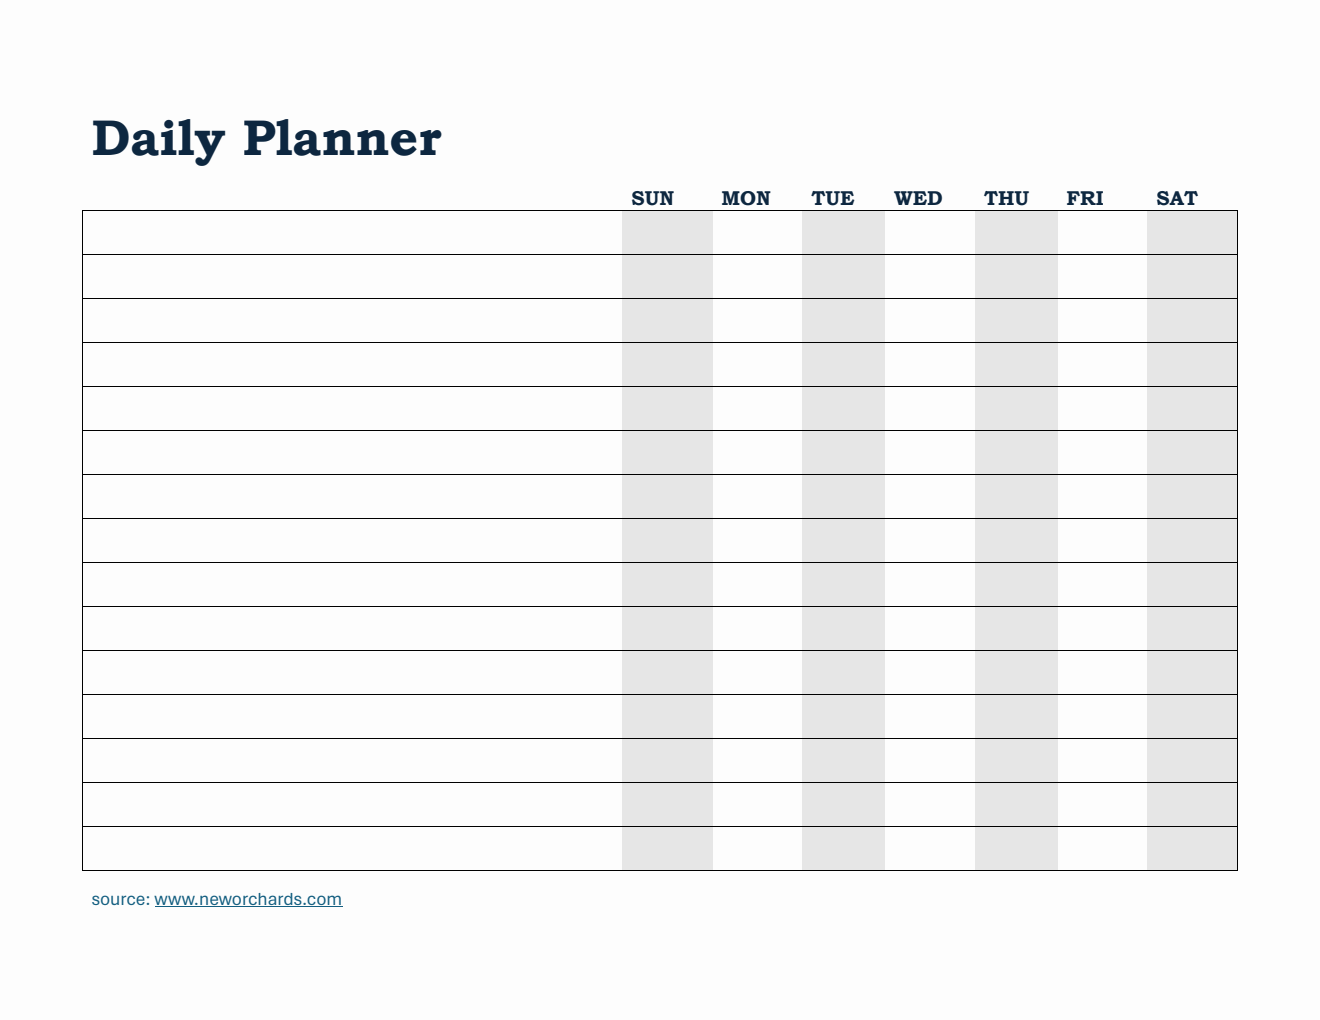 Daily Planner and Checklist Template in Word (Simple)